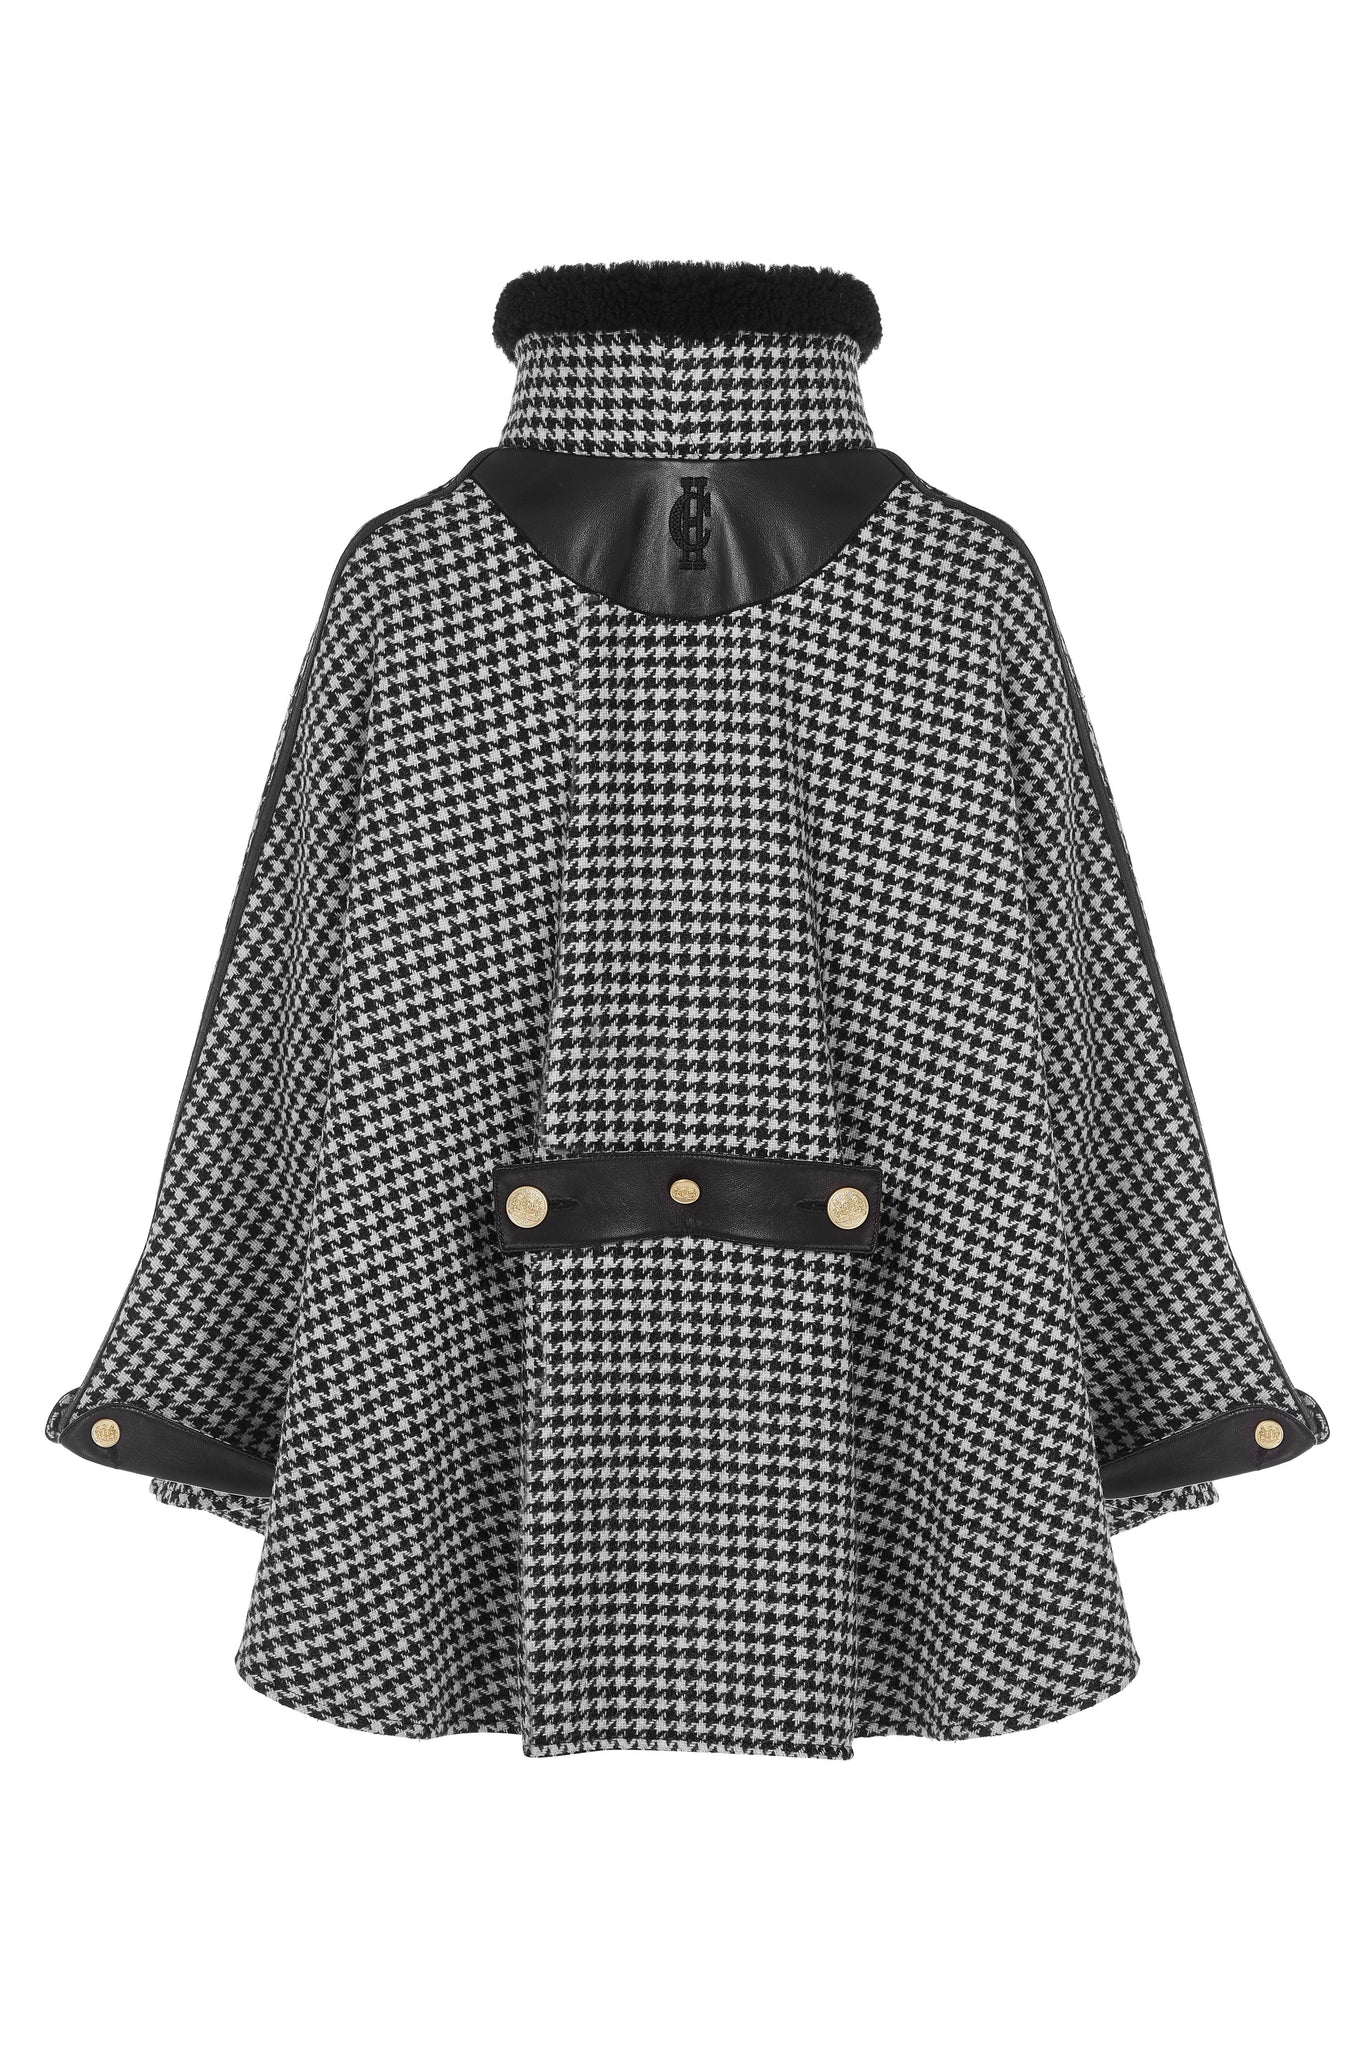 Chiltern Cape (Houndstooth)